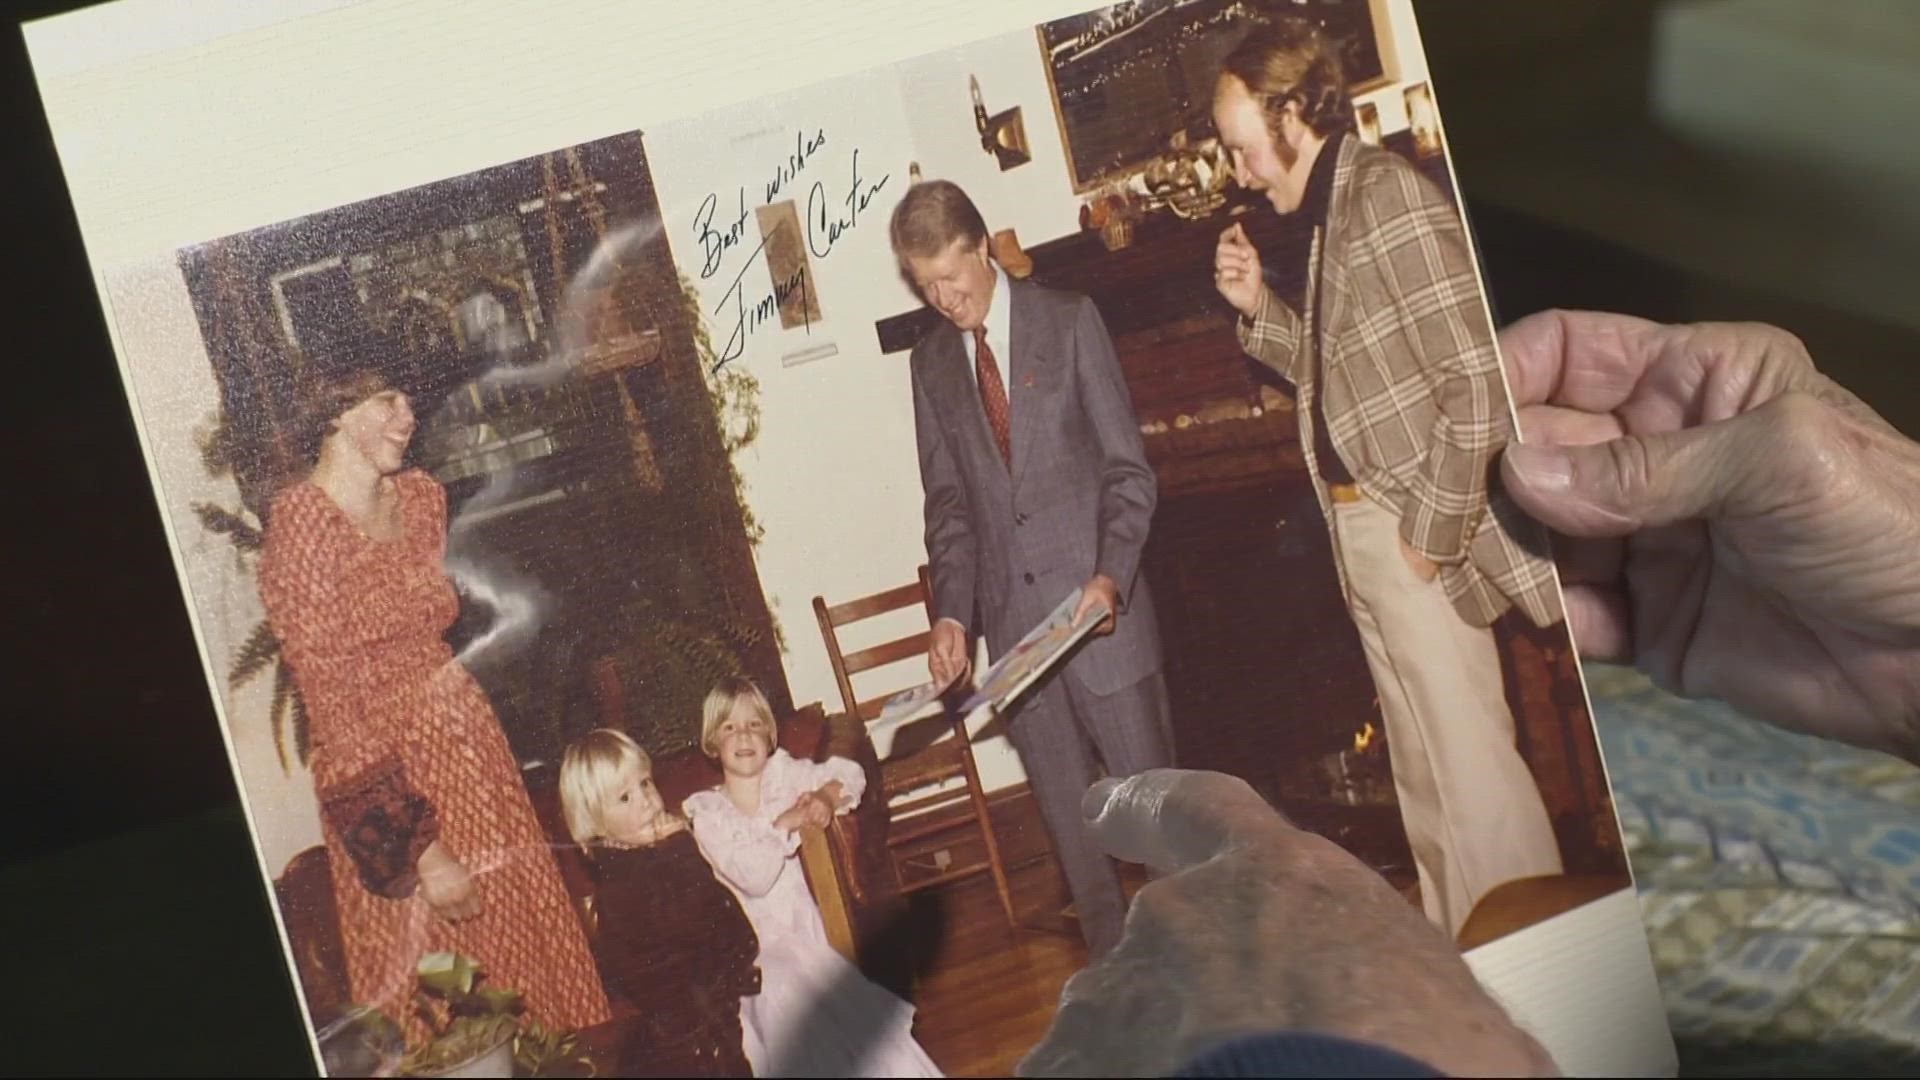 As former President Jimmy Carter receives hospice care, a Portland couple remembers the time he was their house guest during a presidential visit.